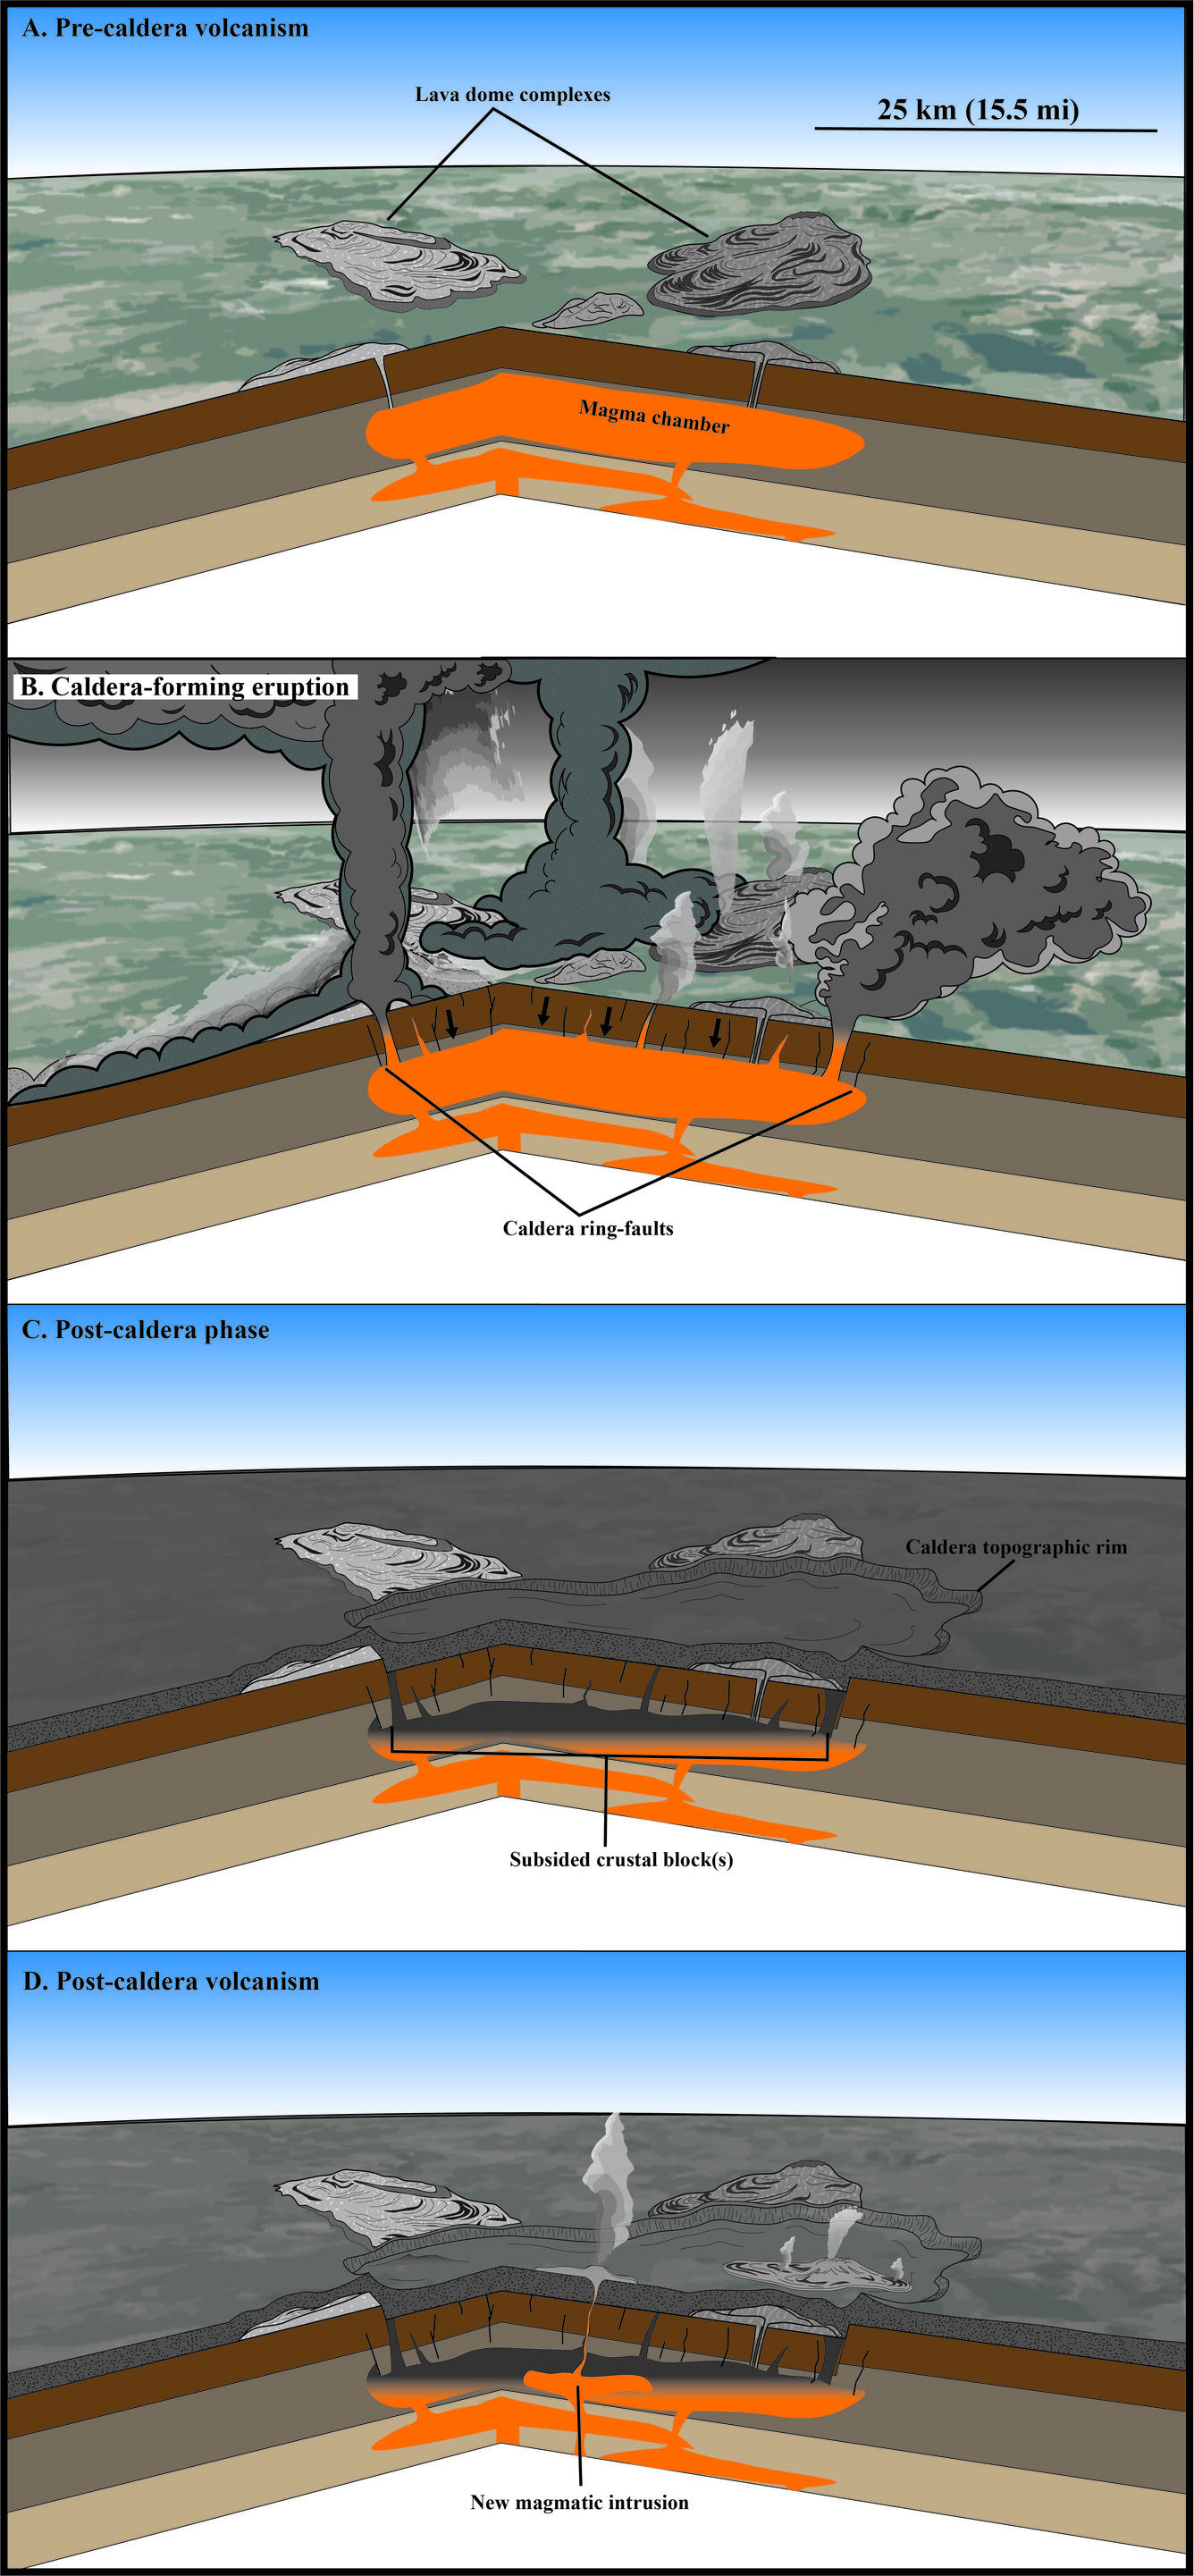 Schematic showing collapse processes of Yellowstone Caldera